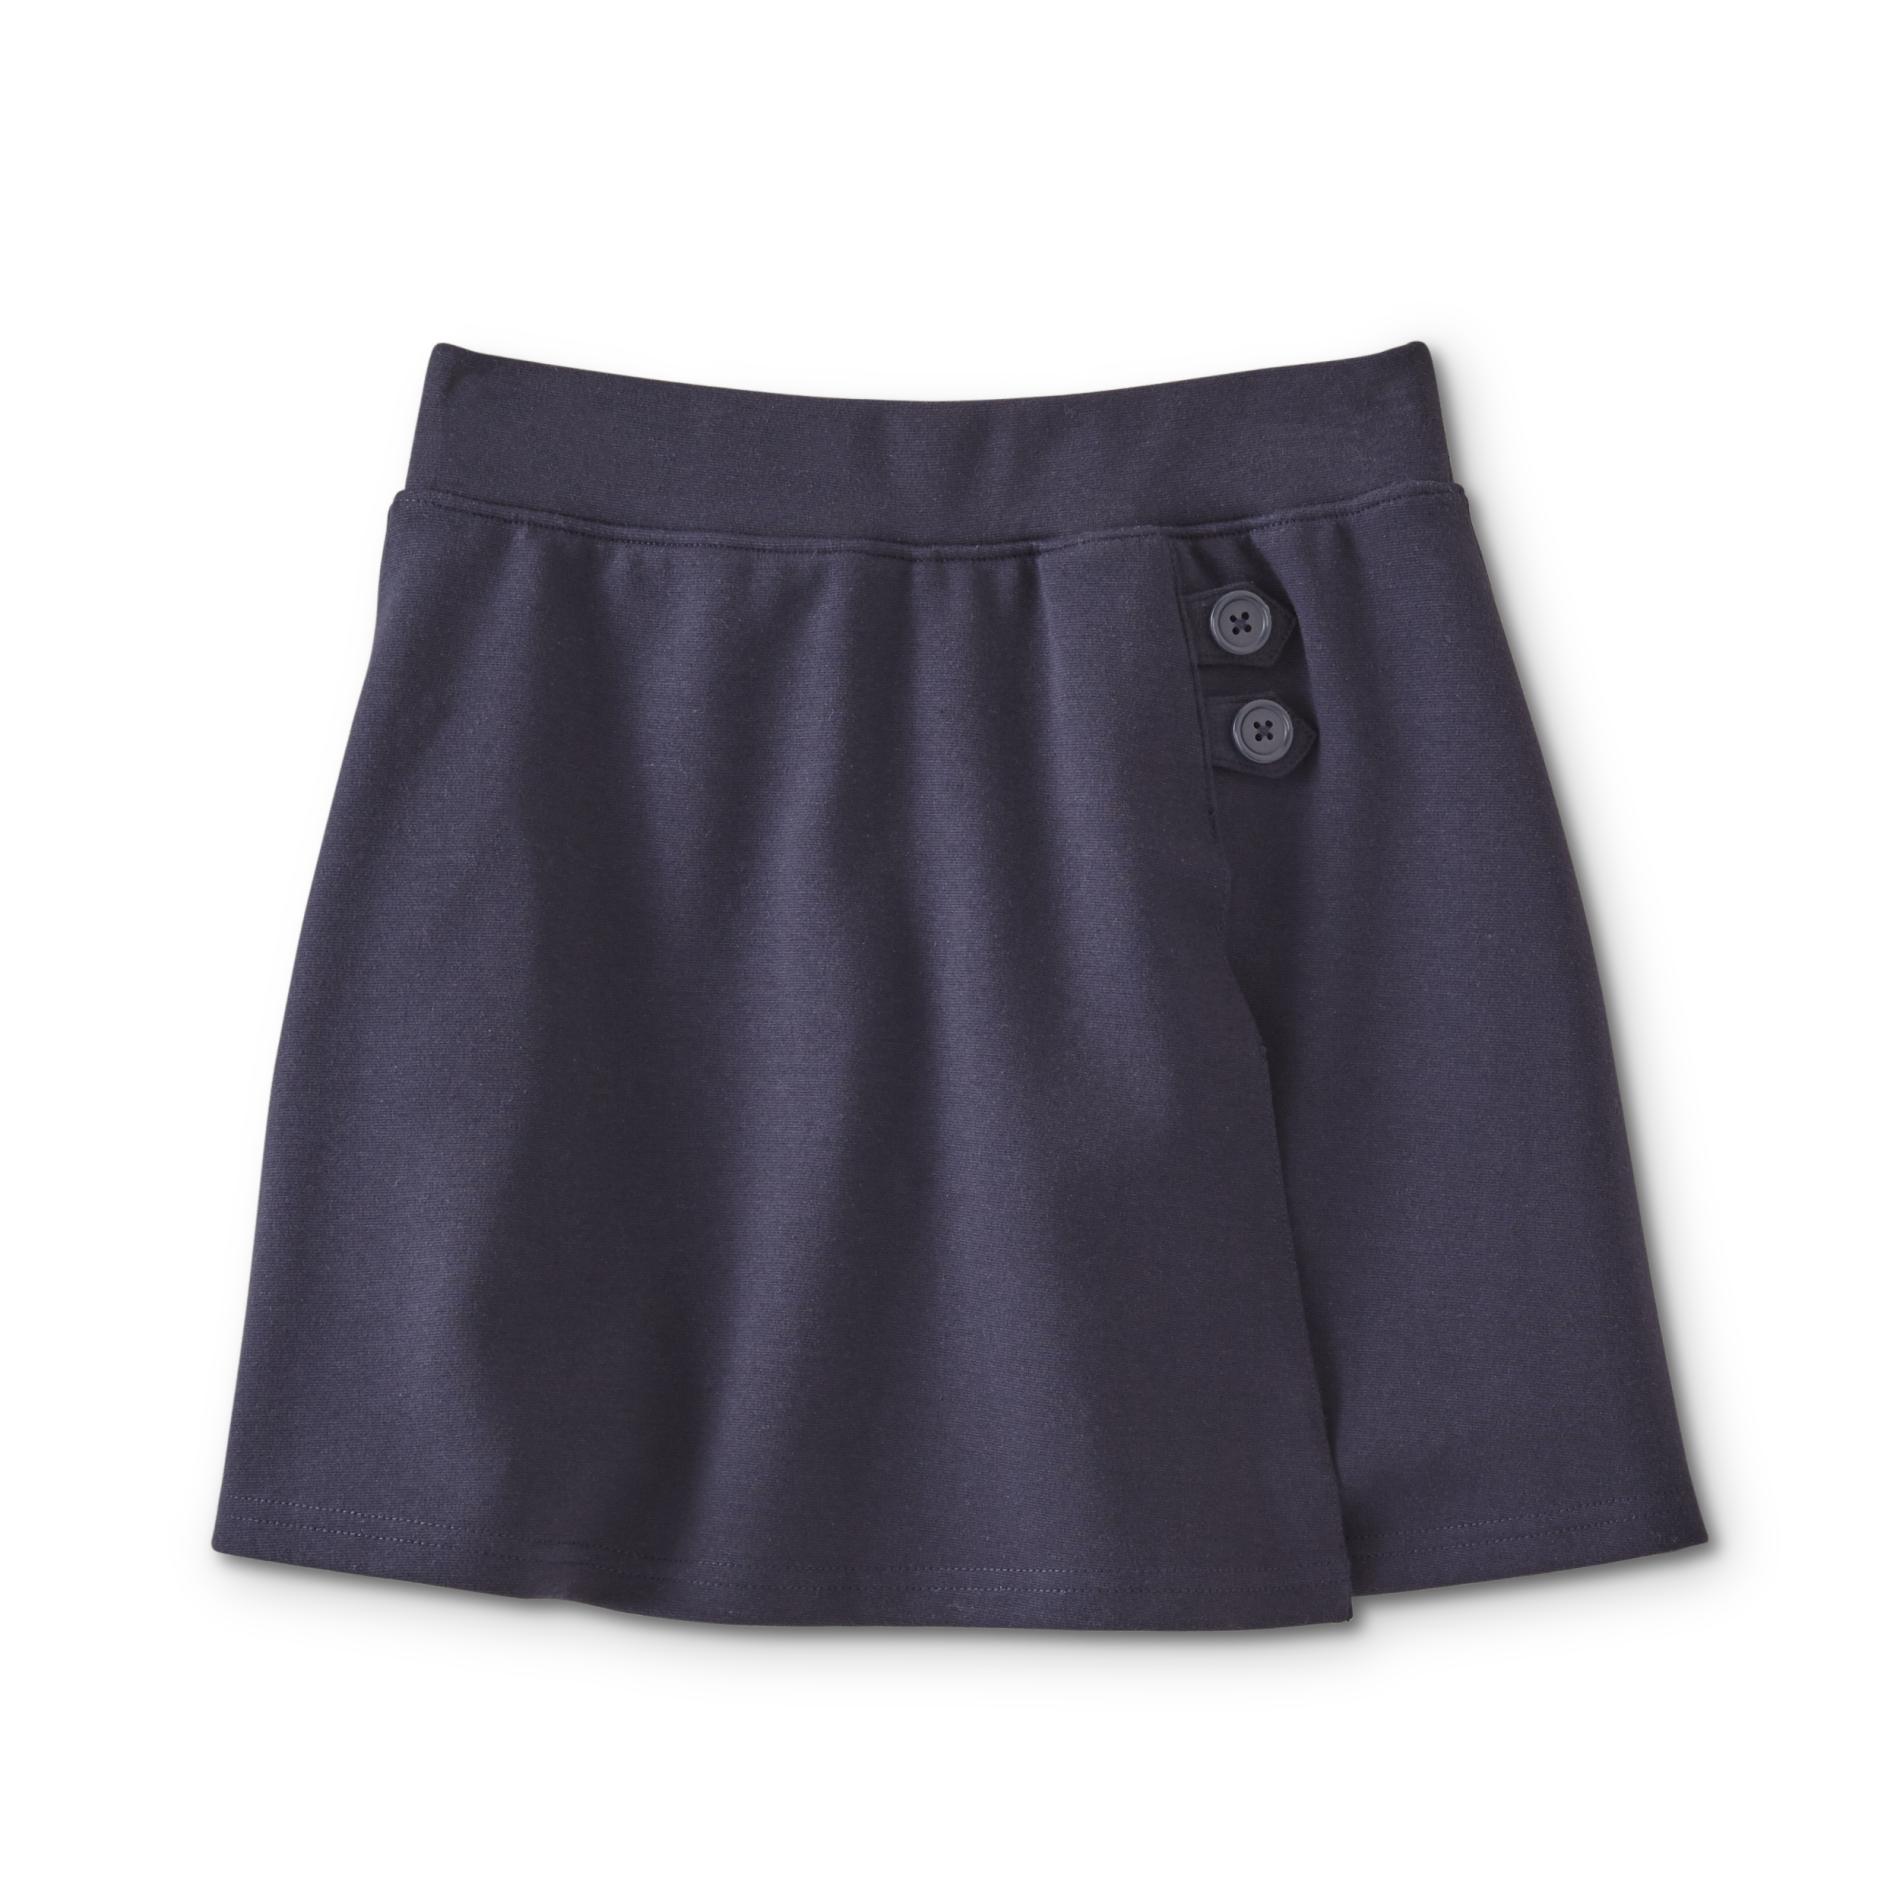 Simply Styled Girls' Scooter Skirt